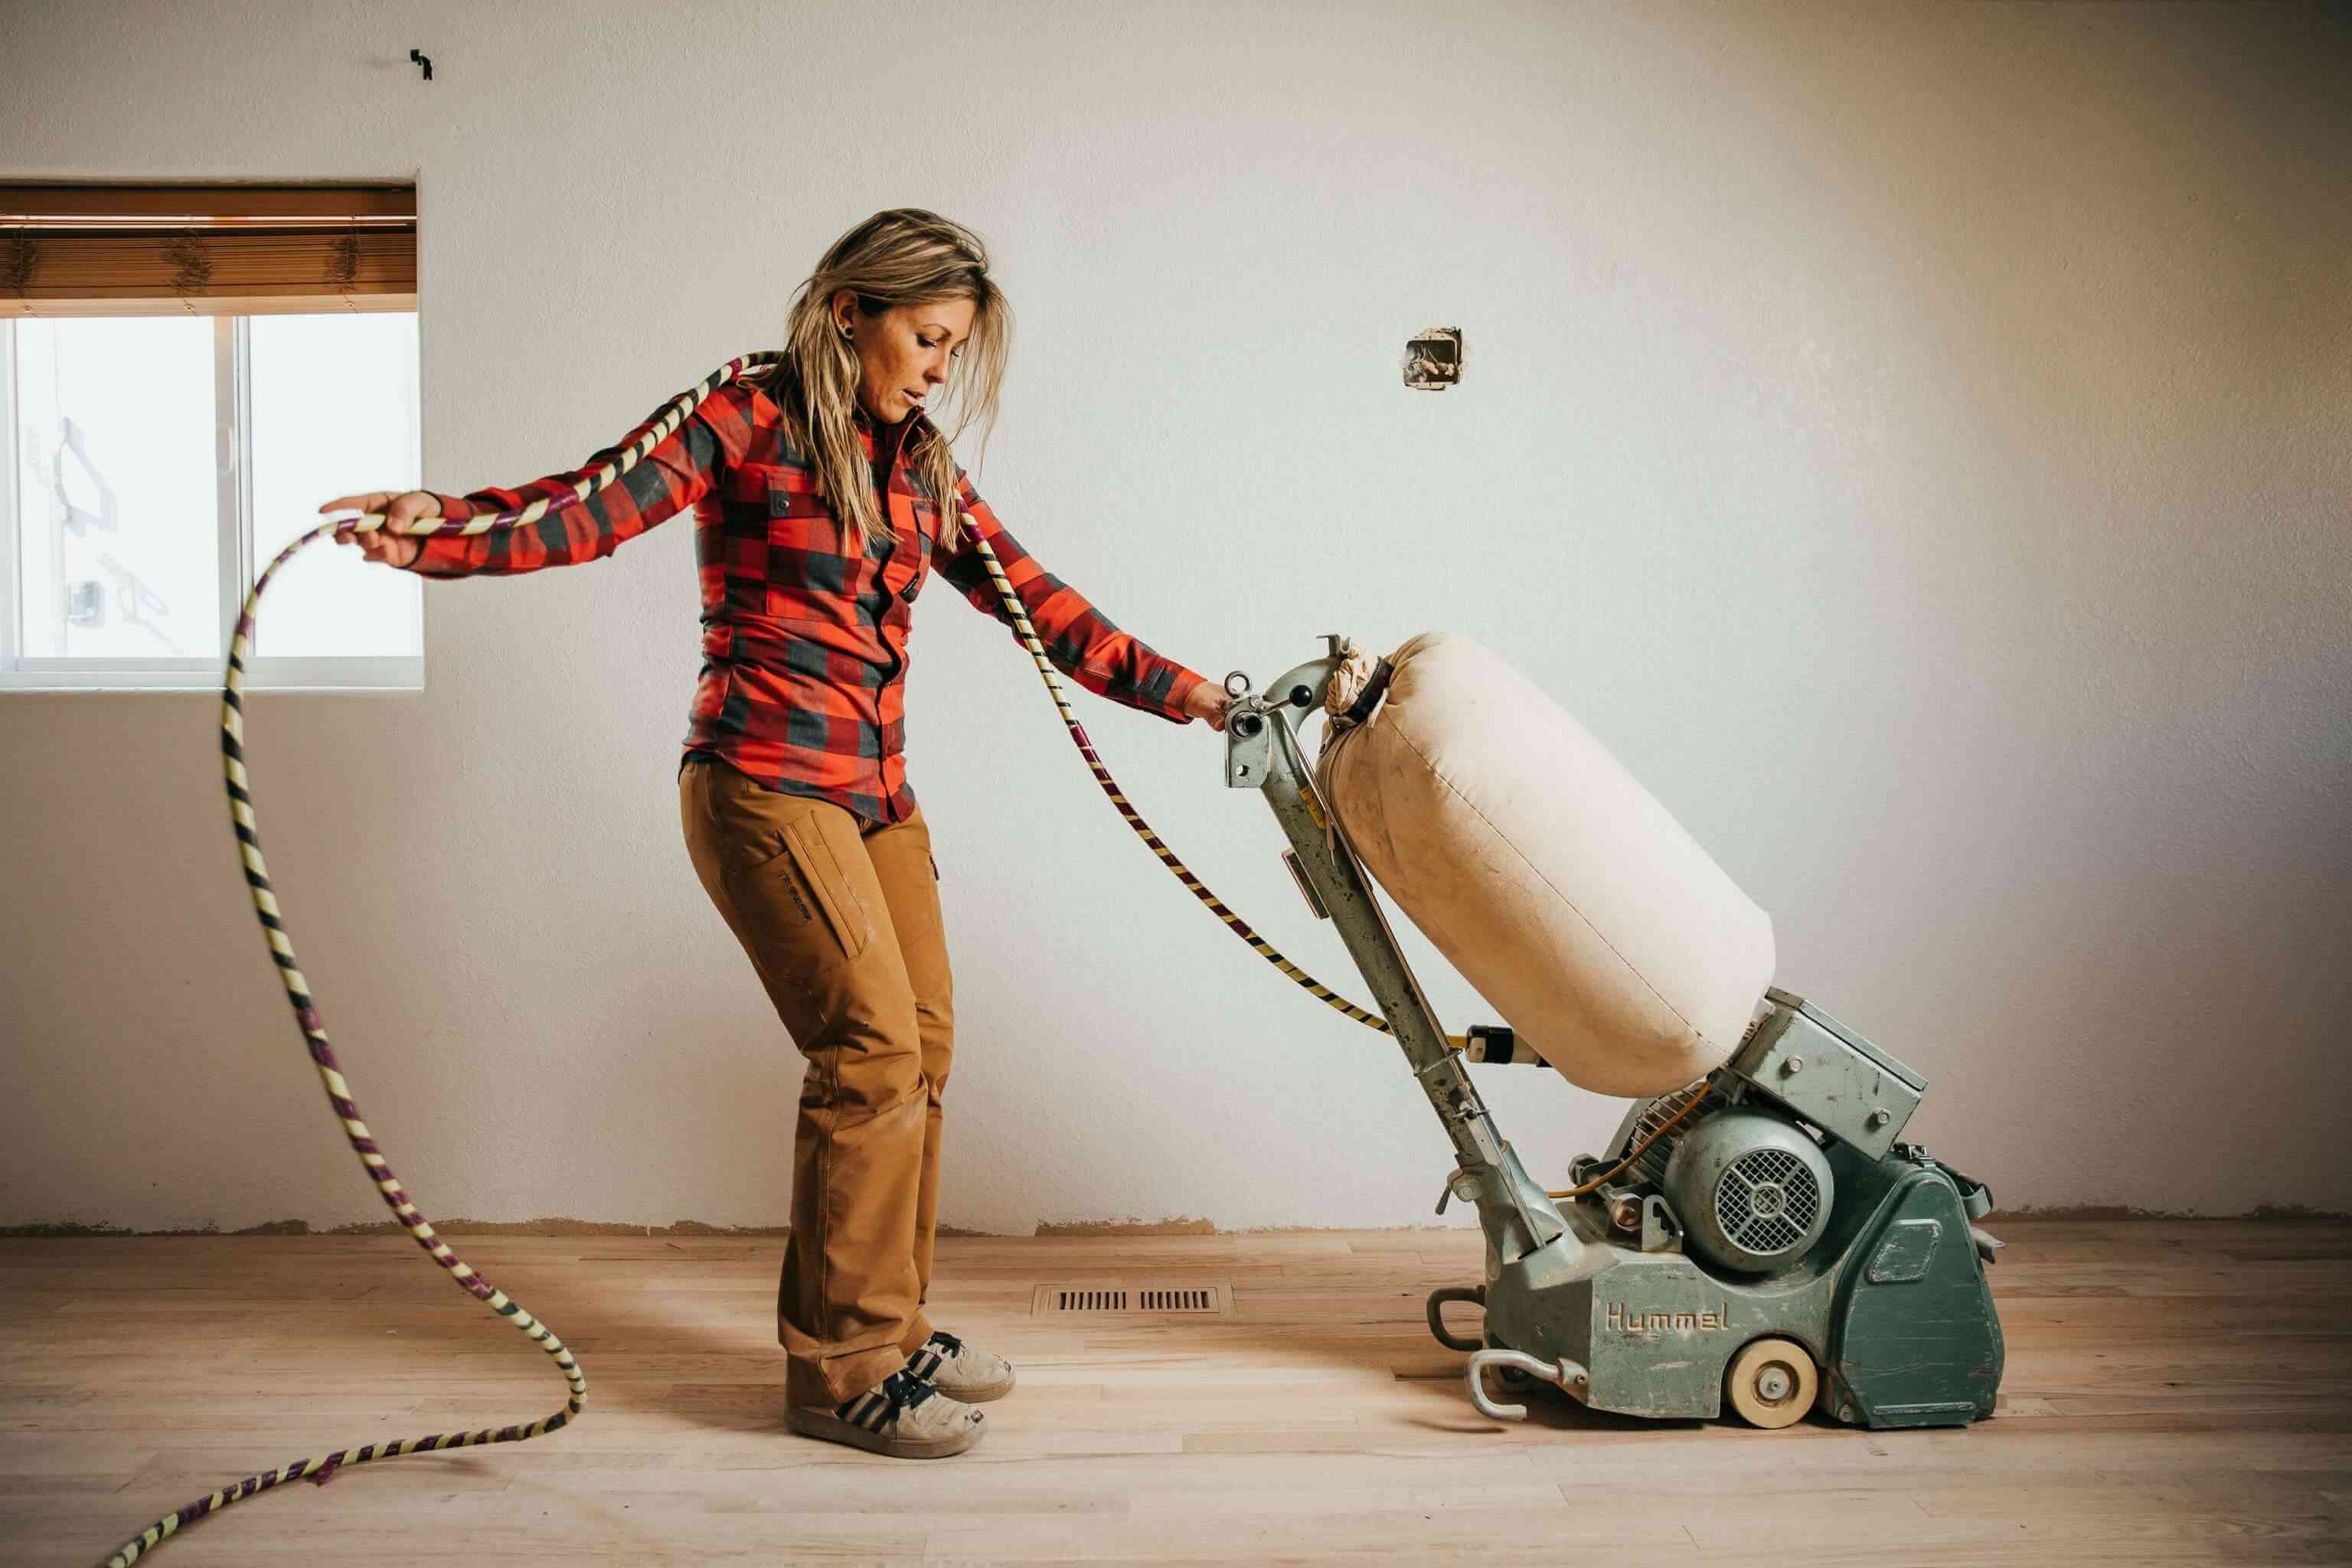 Laurie Bitzkowksi handles a floor sander as she works on a hardwood floor in a house remodel.